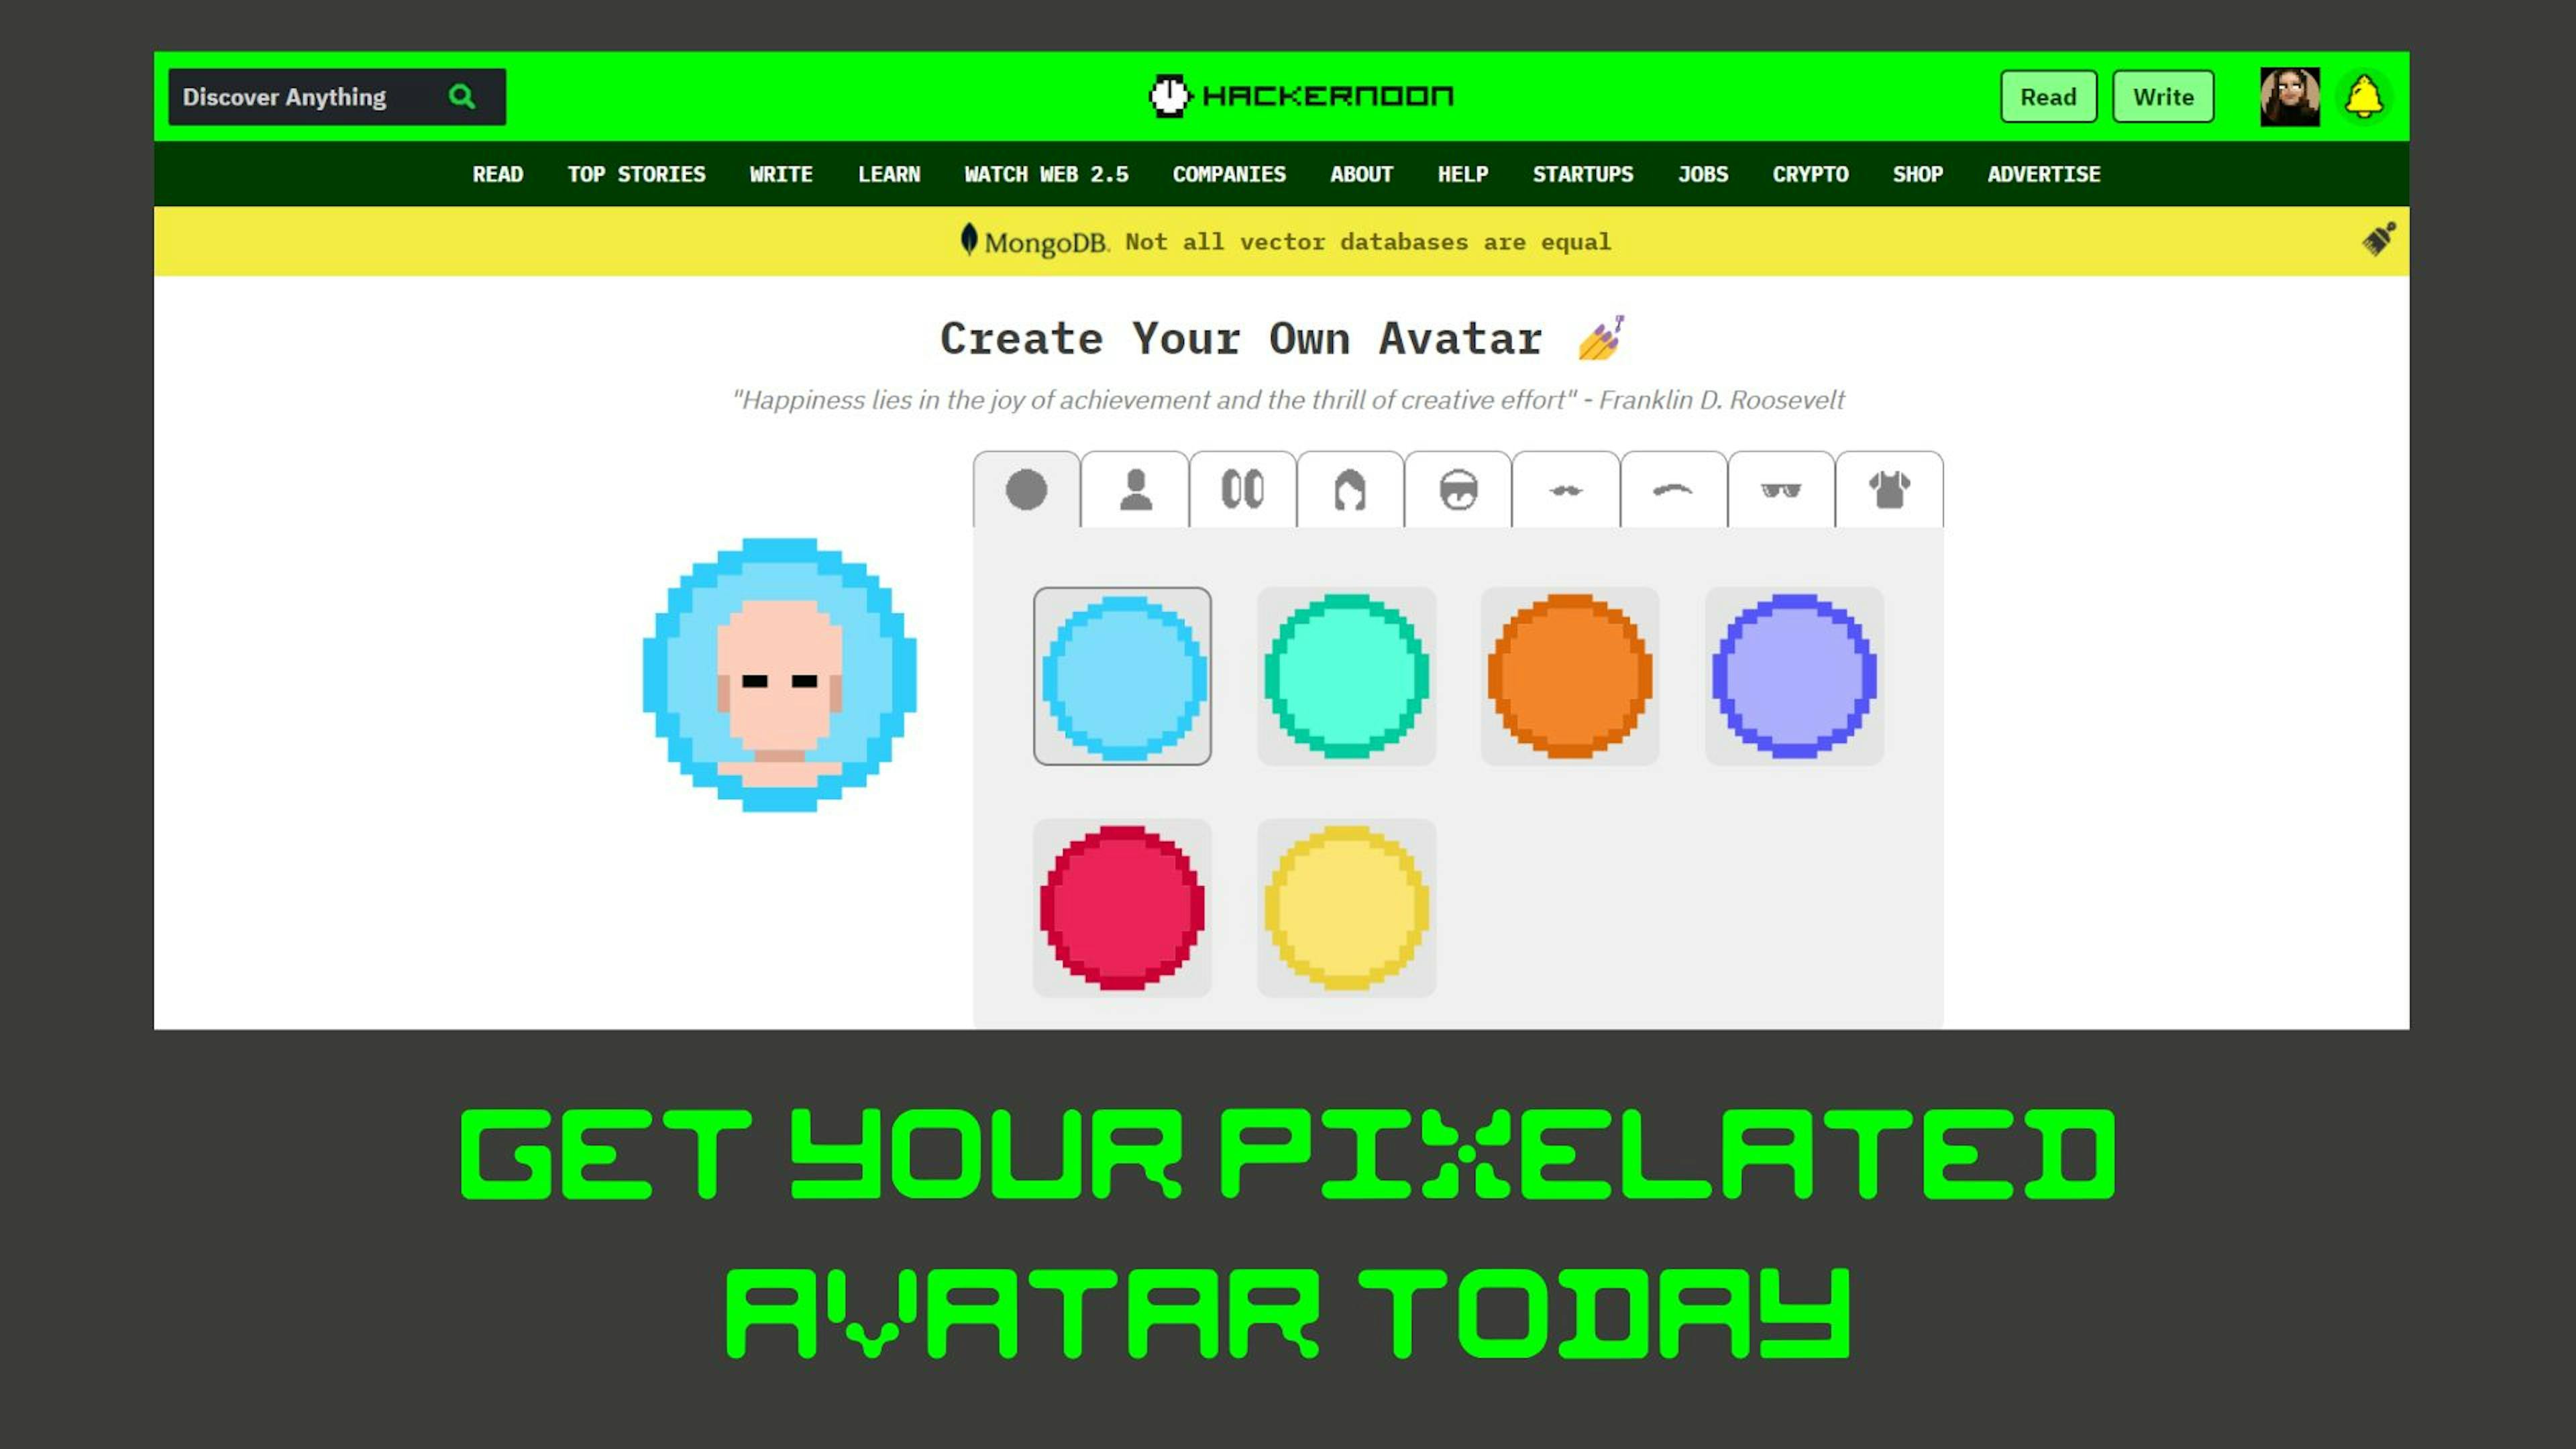 featured image - HackerNoon's Pixelated Avatars Now Available For Everyone